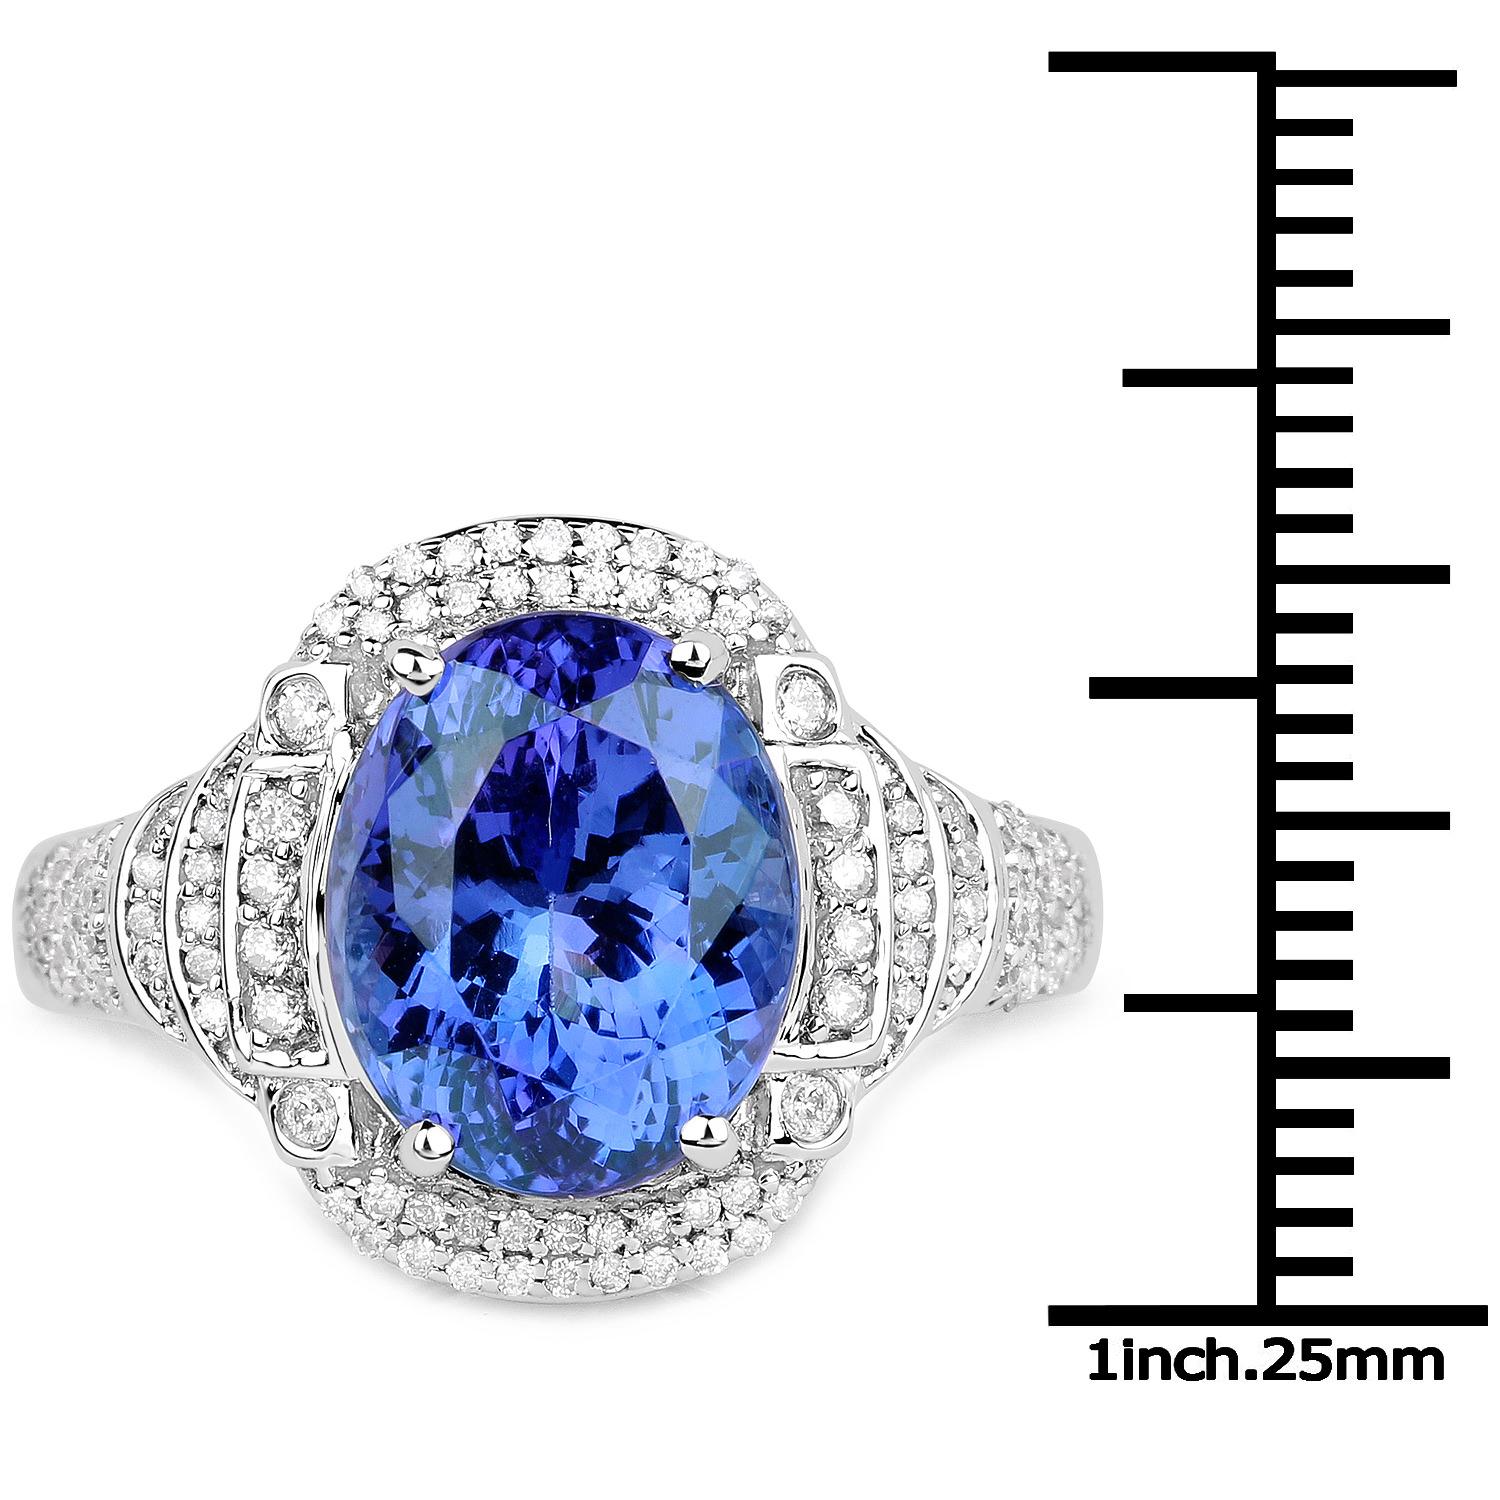 Natural Tanzanite and Diamond Cocktail Ring 6.45 Carats 14k White Gold In Excellent Condition For Sale In Laguna Niguel, CA